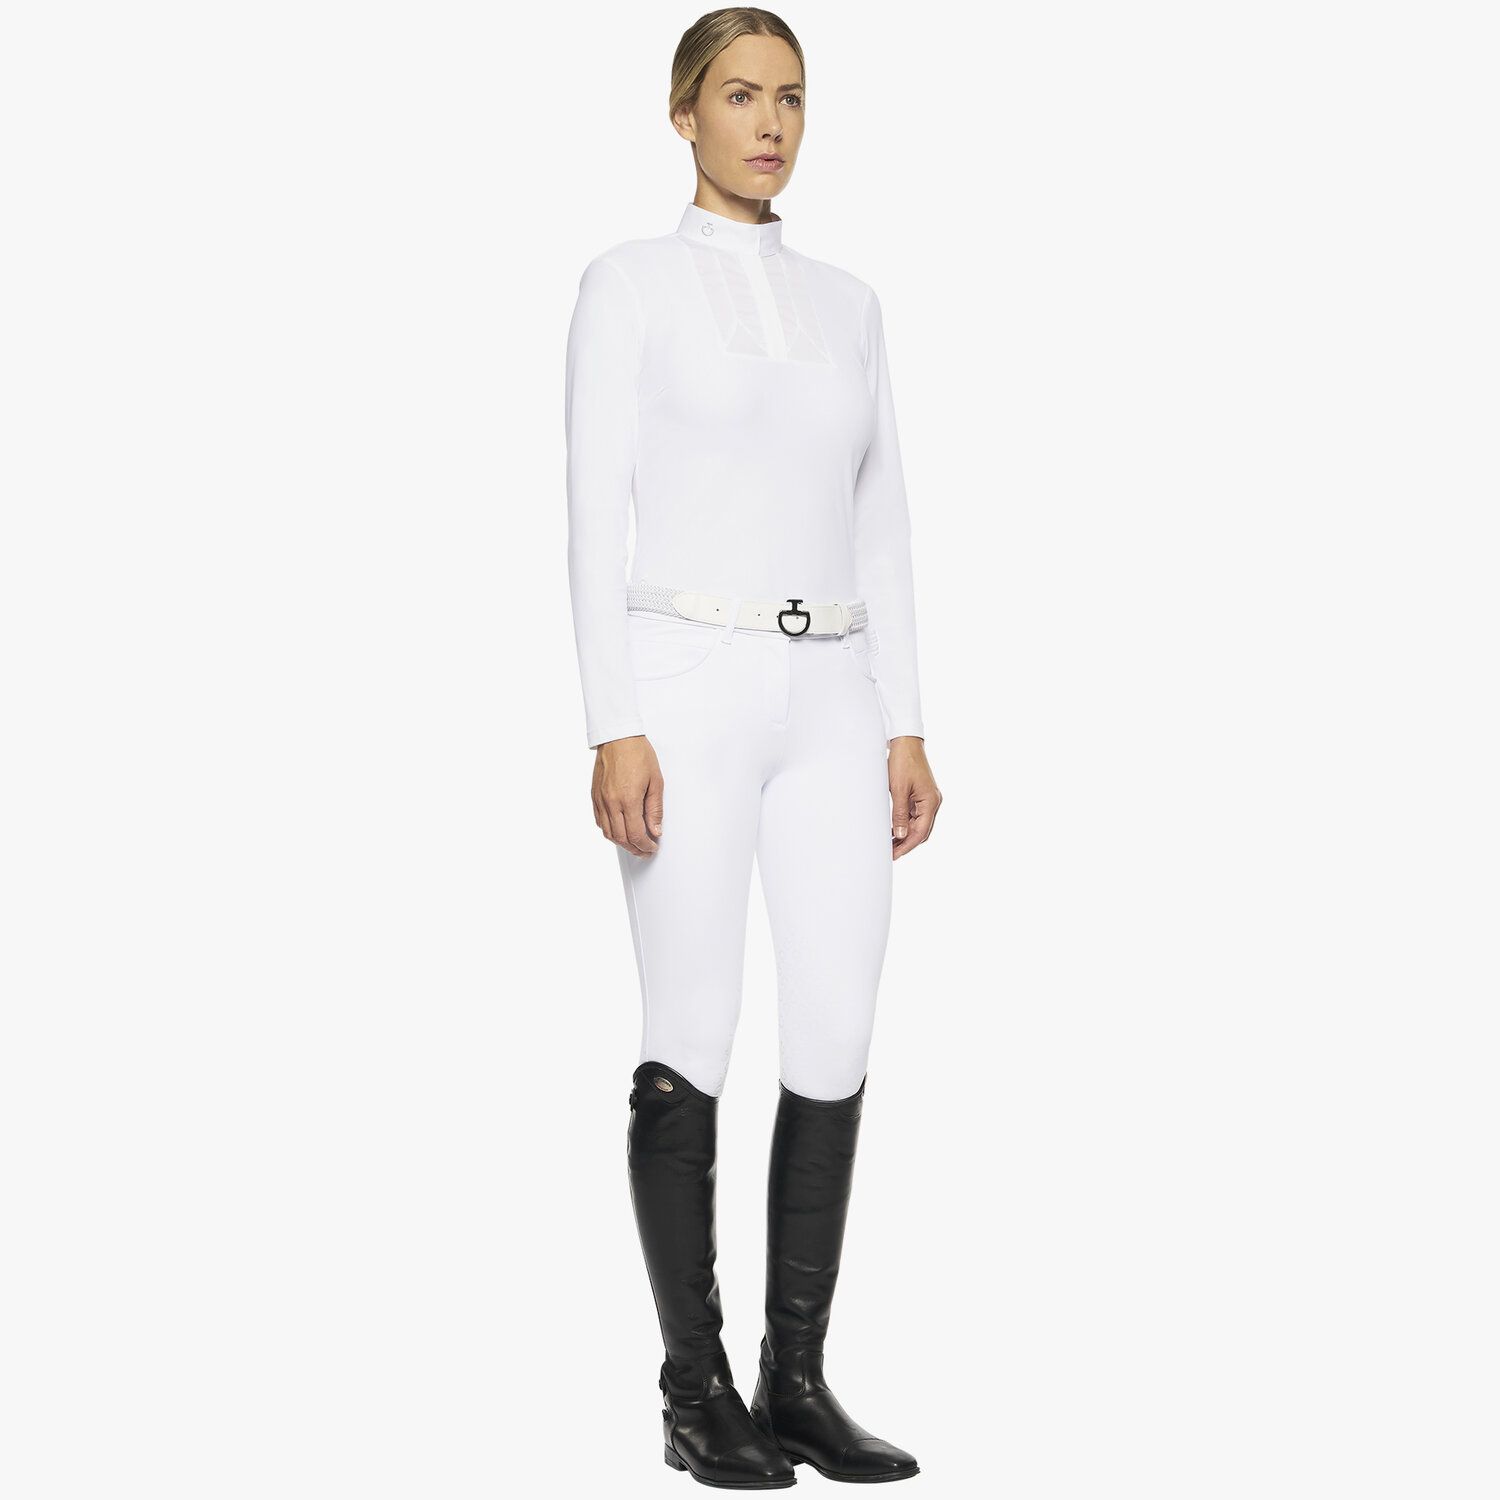 Cavalleria Toscana Women's long-sleeved polo with bib WHITE-2